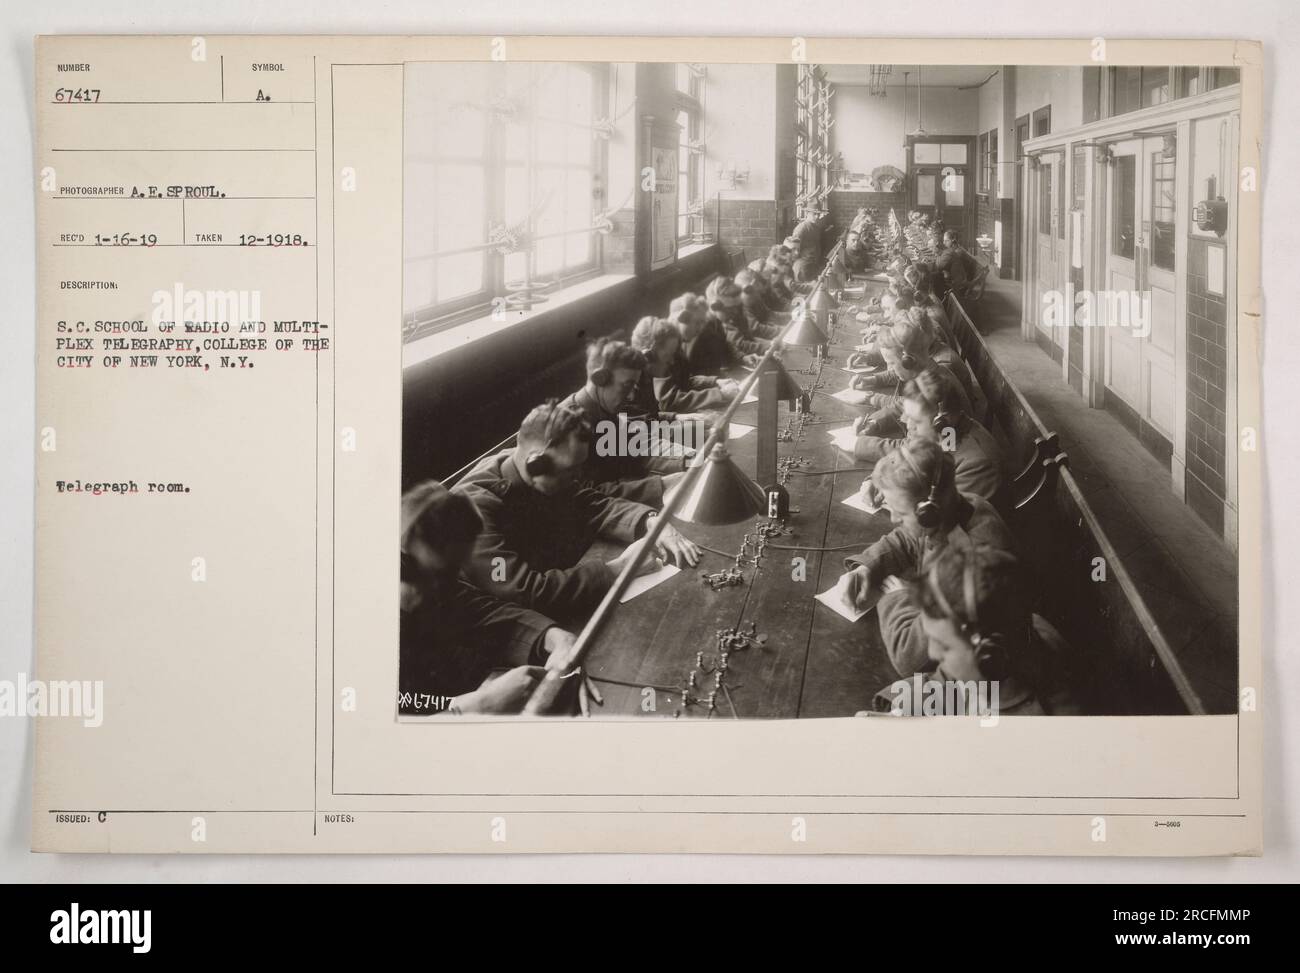 Caption: 'Photograph taken in December 1918 at the S.C. School of Radio and Multiplex Telegraphy, located in the College of the City of New York, New York. The image captures a telegraph room, identified by the symbol 'C.A.S.' (presumably for the school), where students are seen practicing telegraphy.' Stock Photo